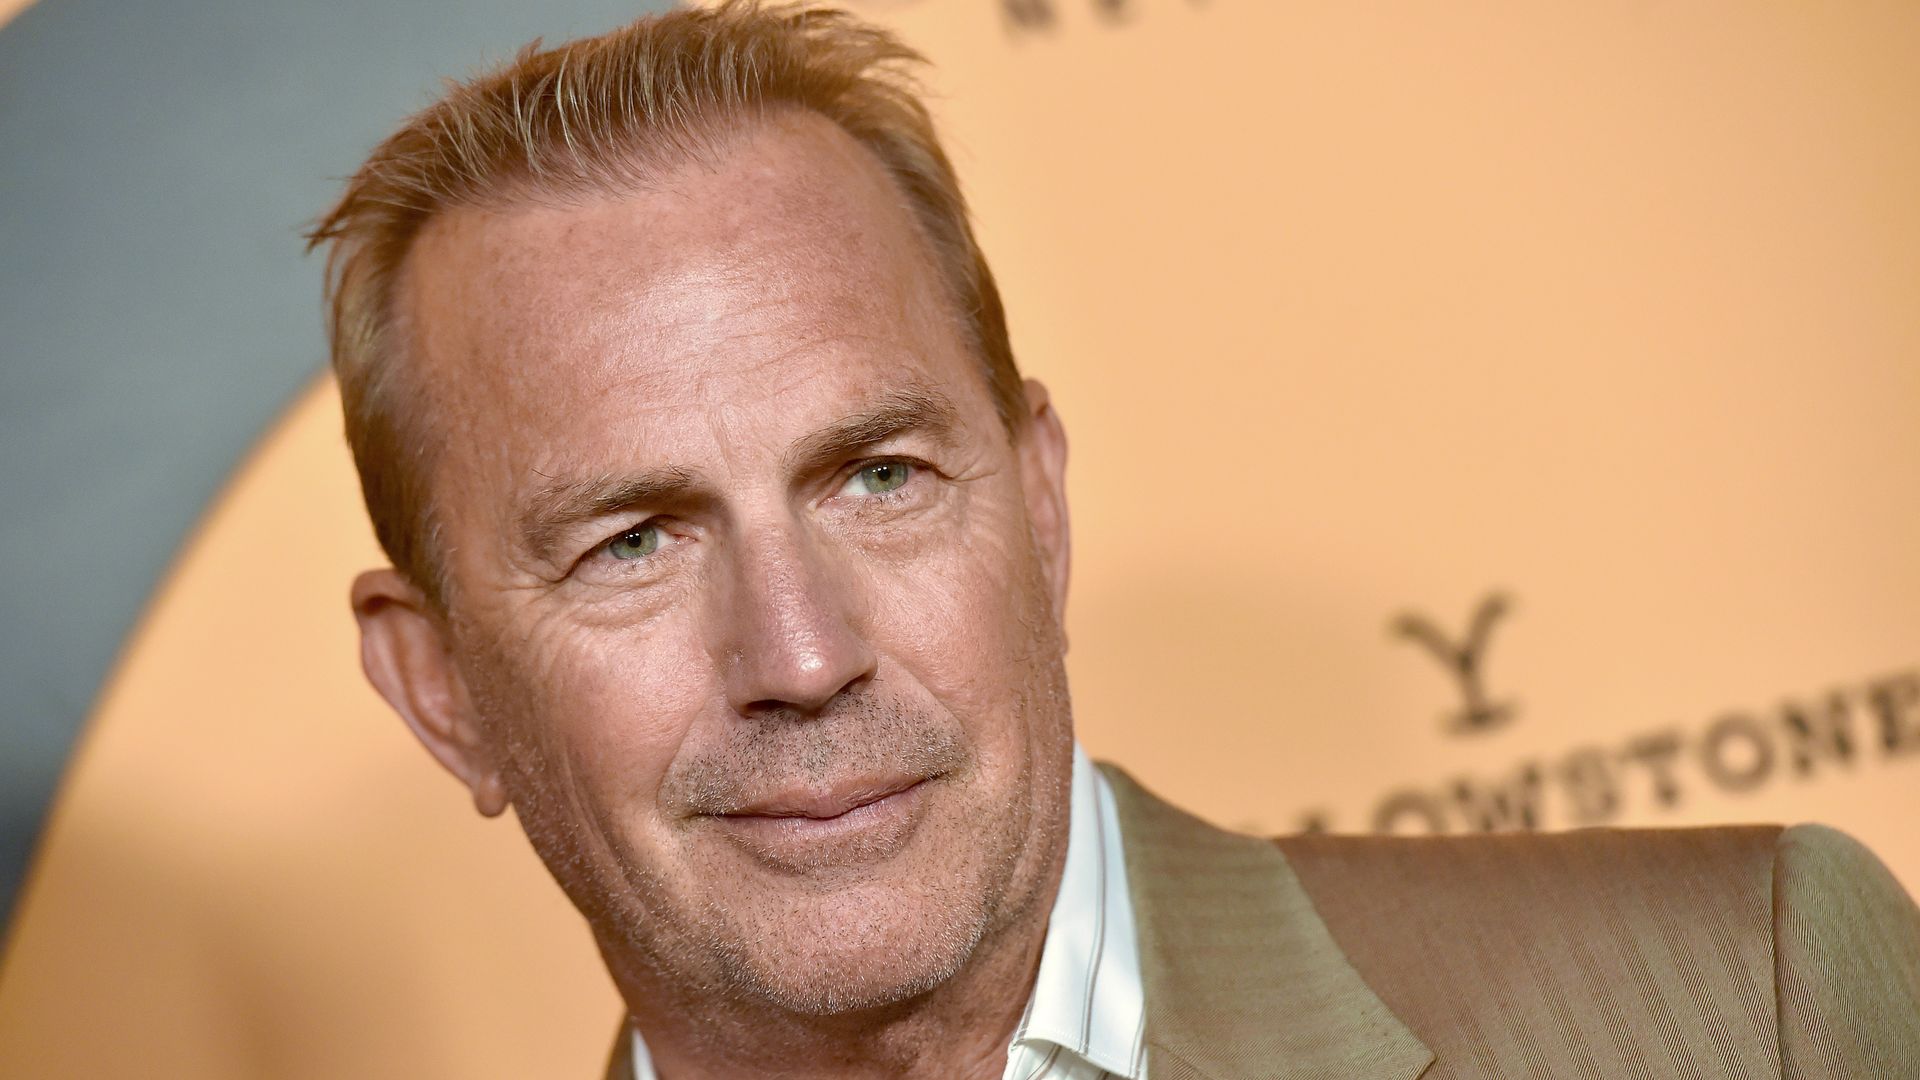 Kevin Costner attends the premiere party for Paramount Network's "Yellowstone" Season 2 at Lombardi House on May 30, 2019